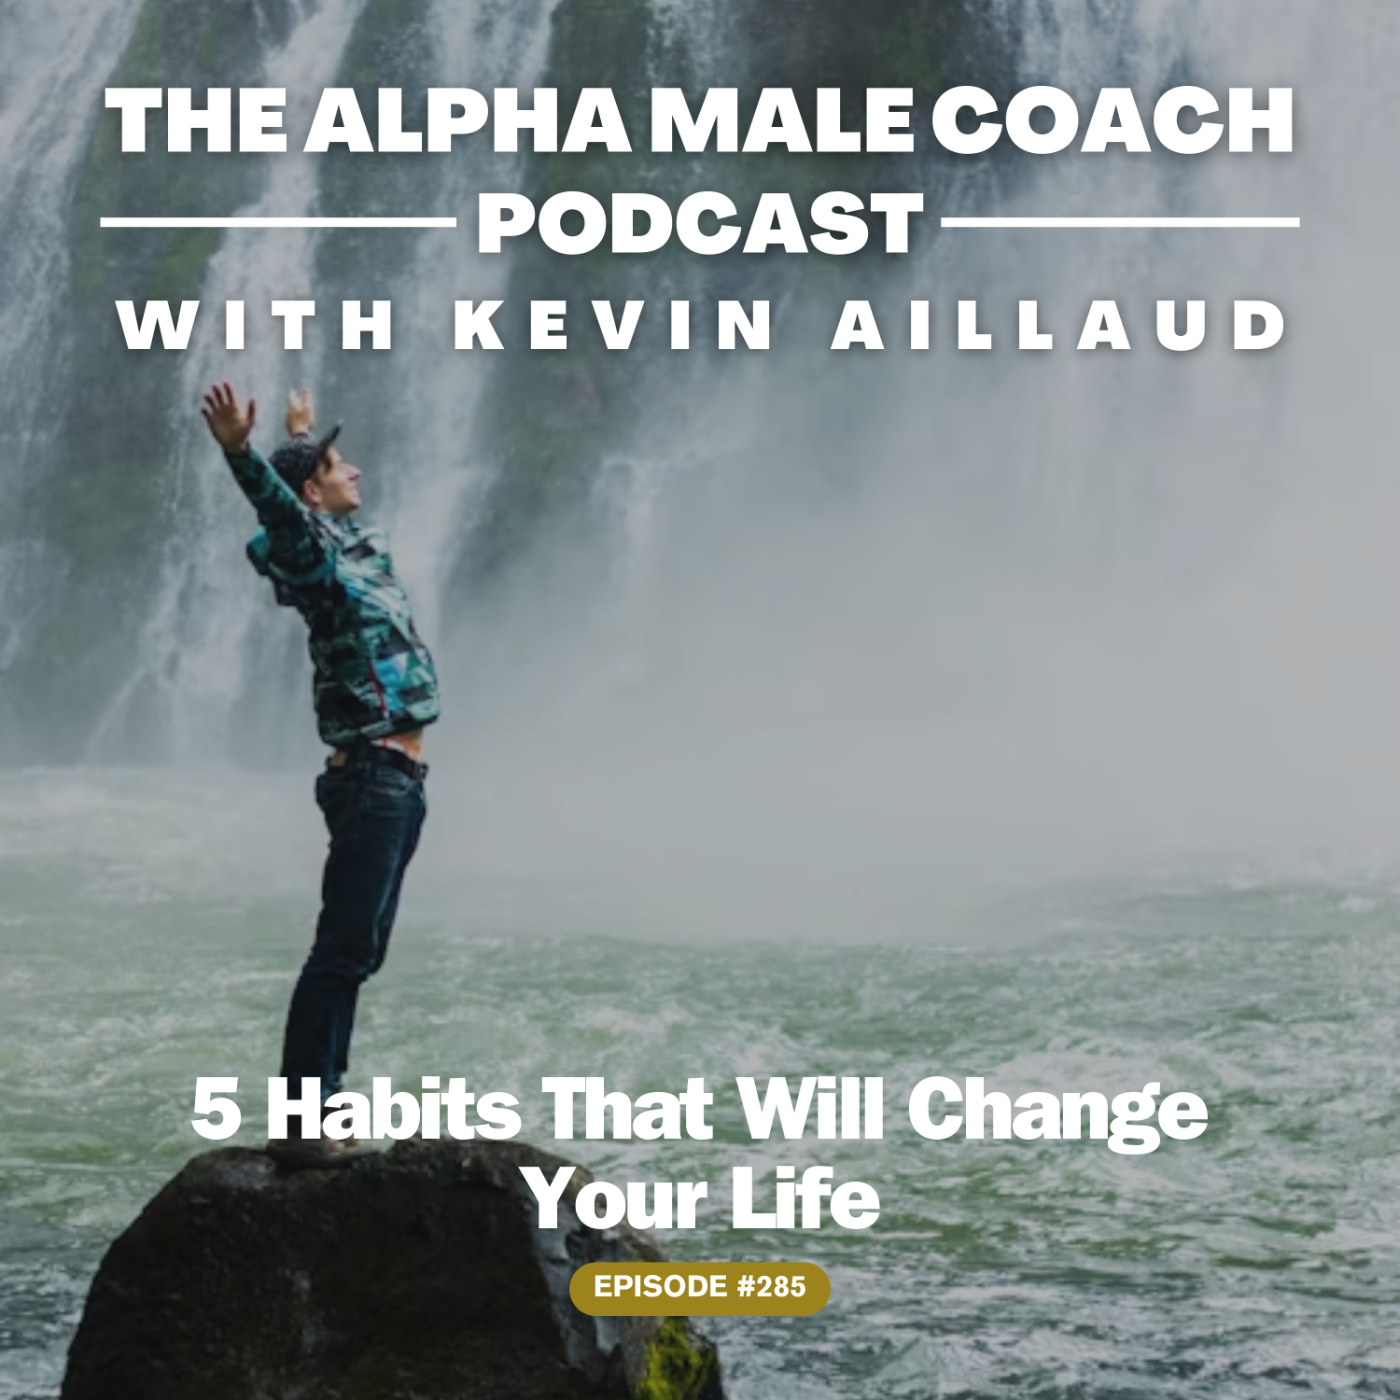 Episode 285: 5 Habits That Will Change Your Life